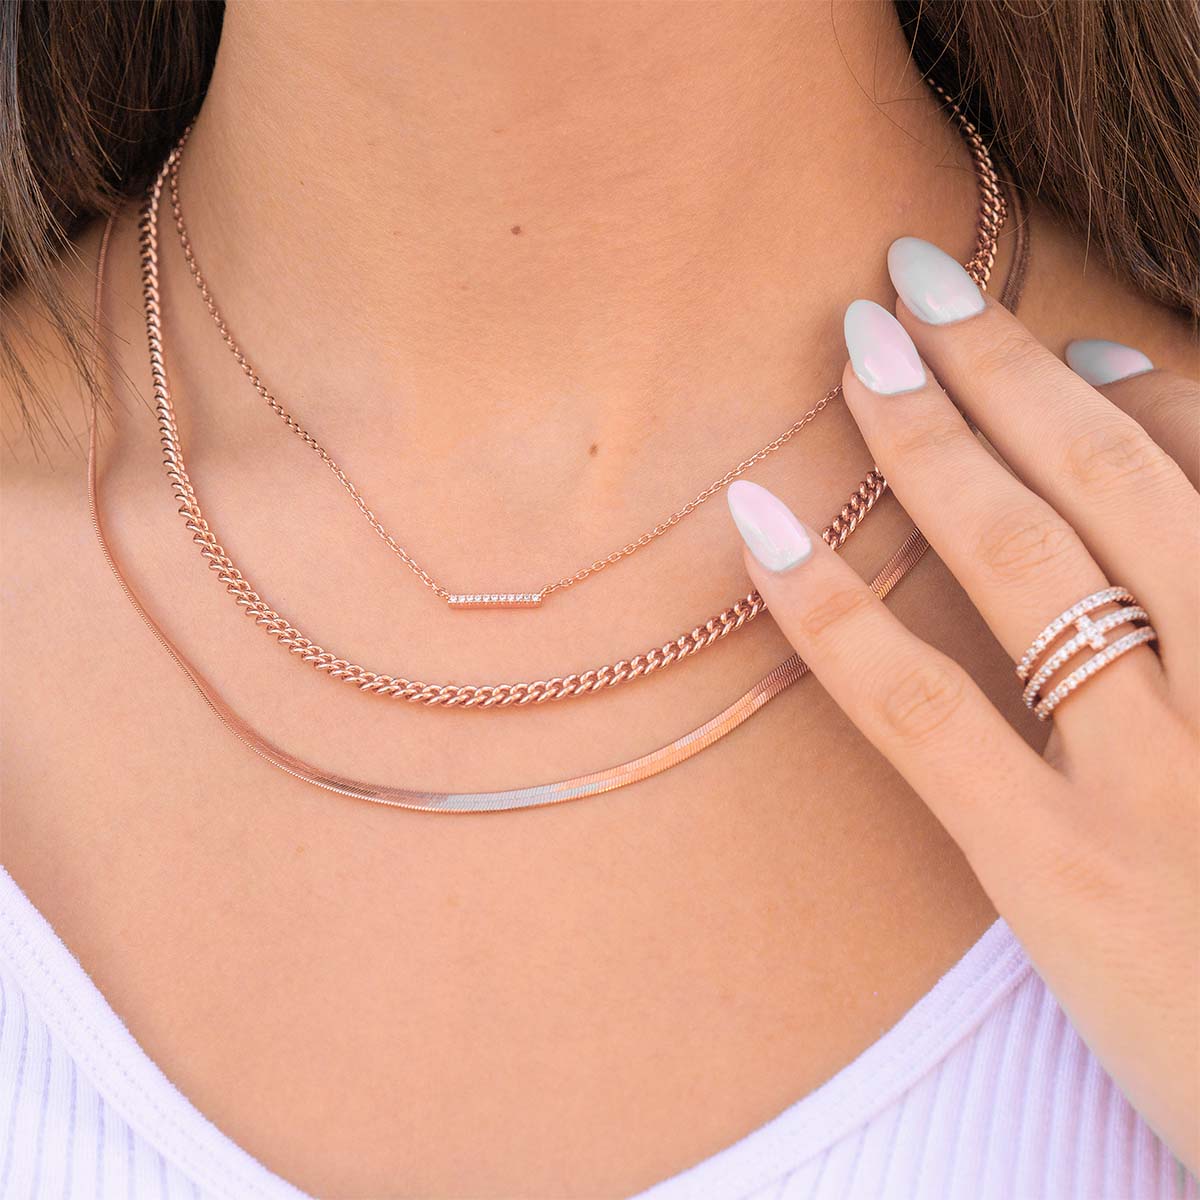 Necklace Extenders 100 1 1/2-2 in Lt Rose Gold Plt Twist Cable